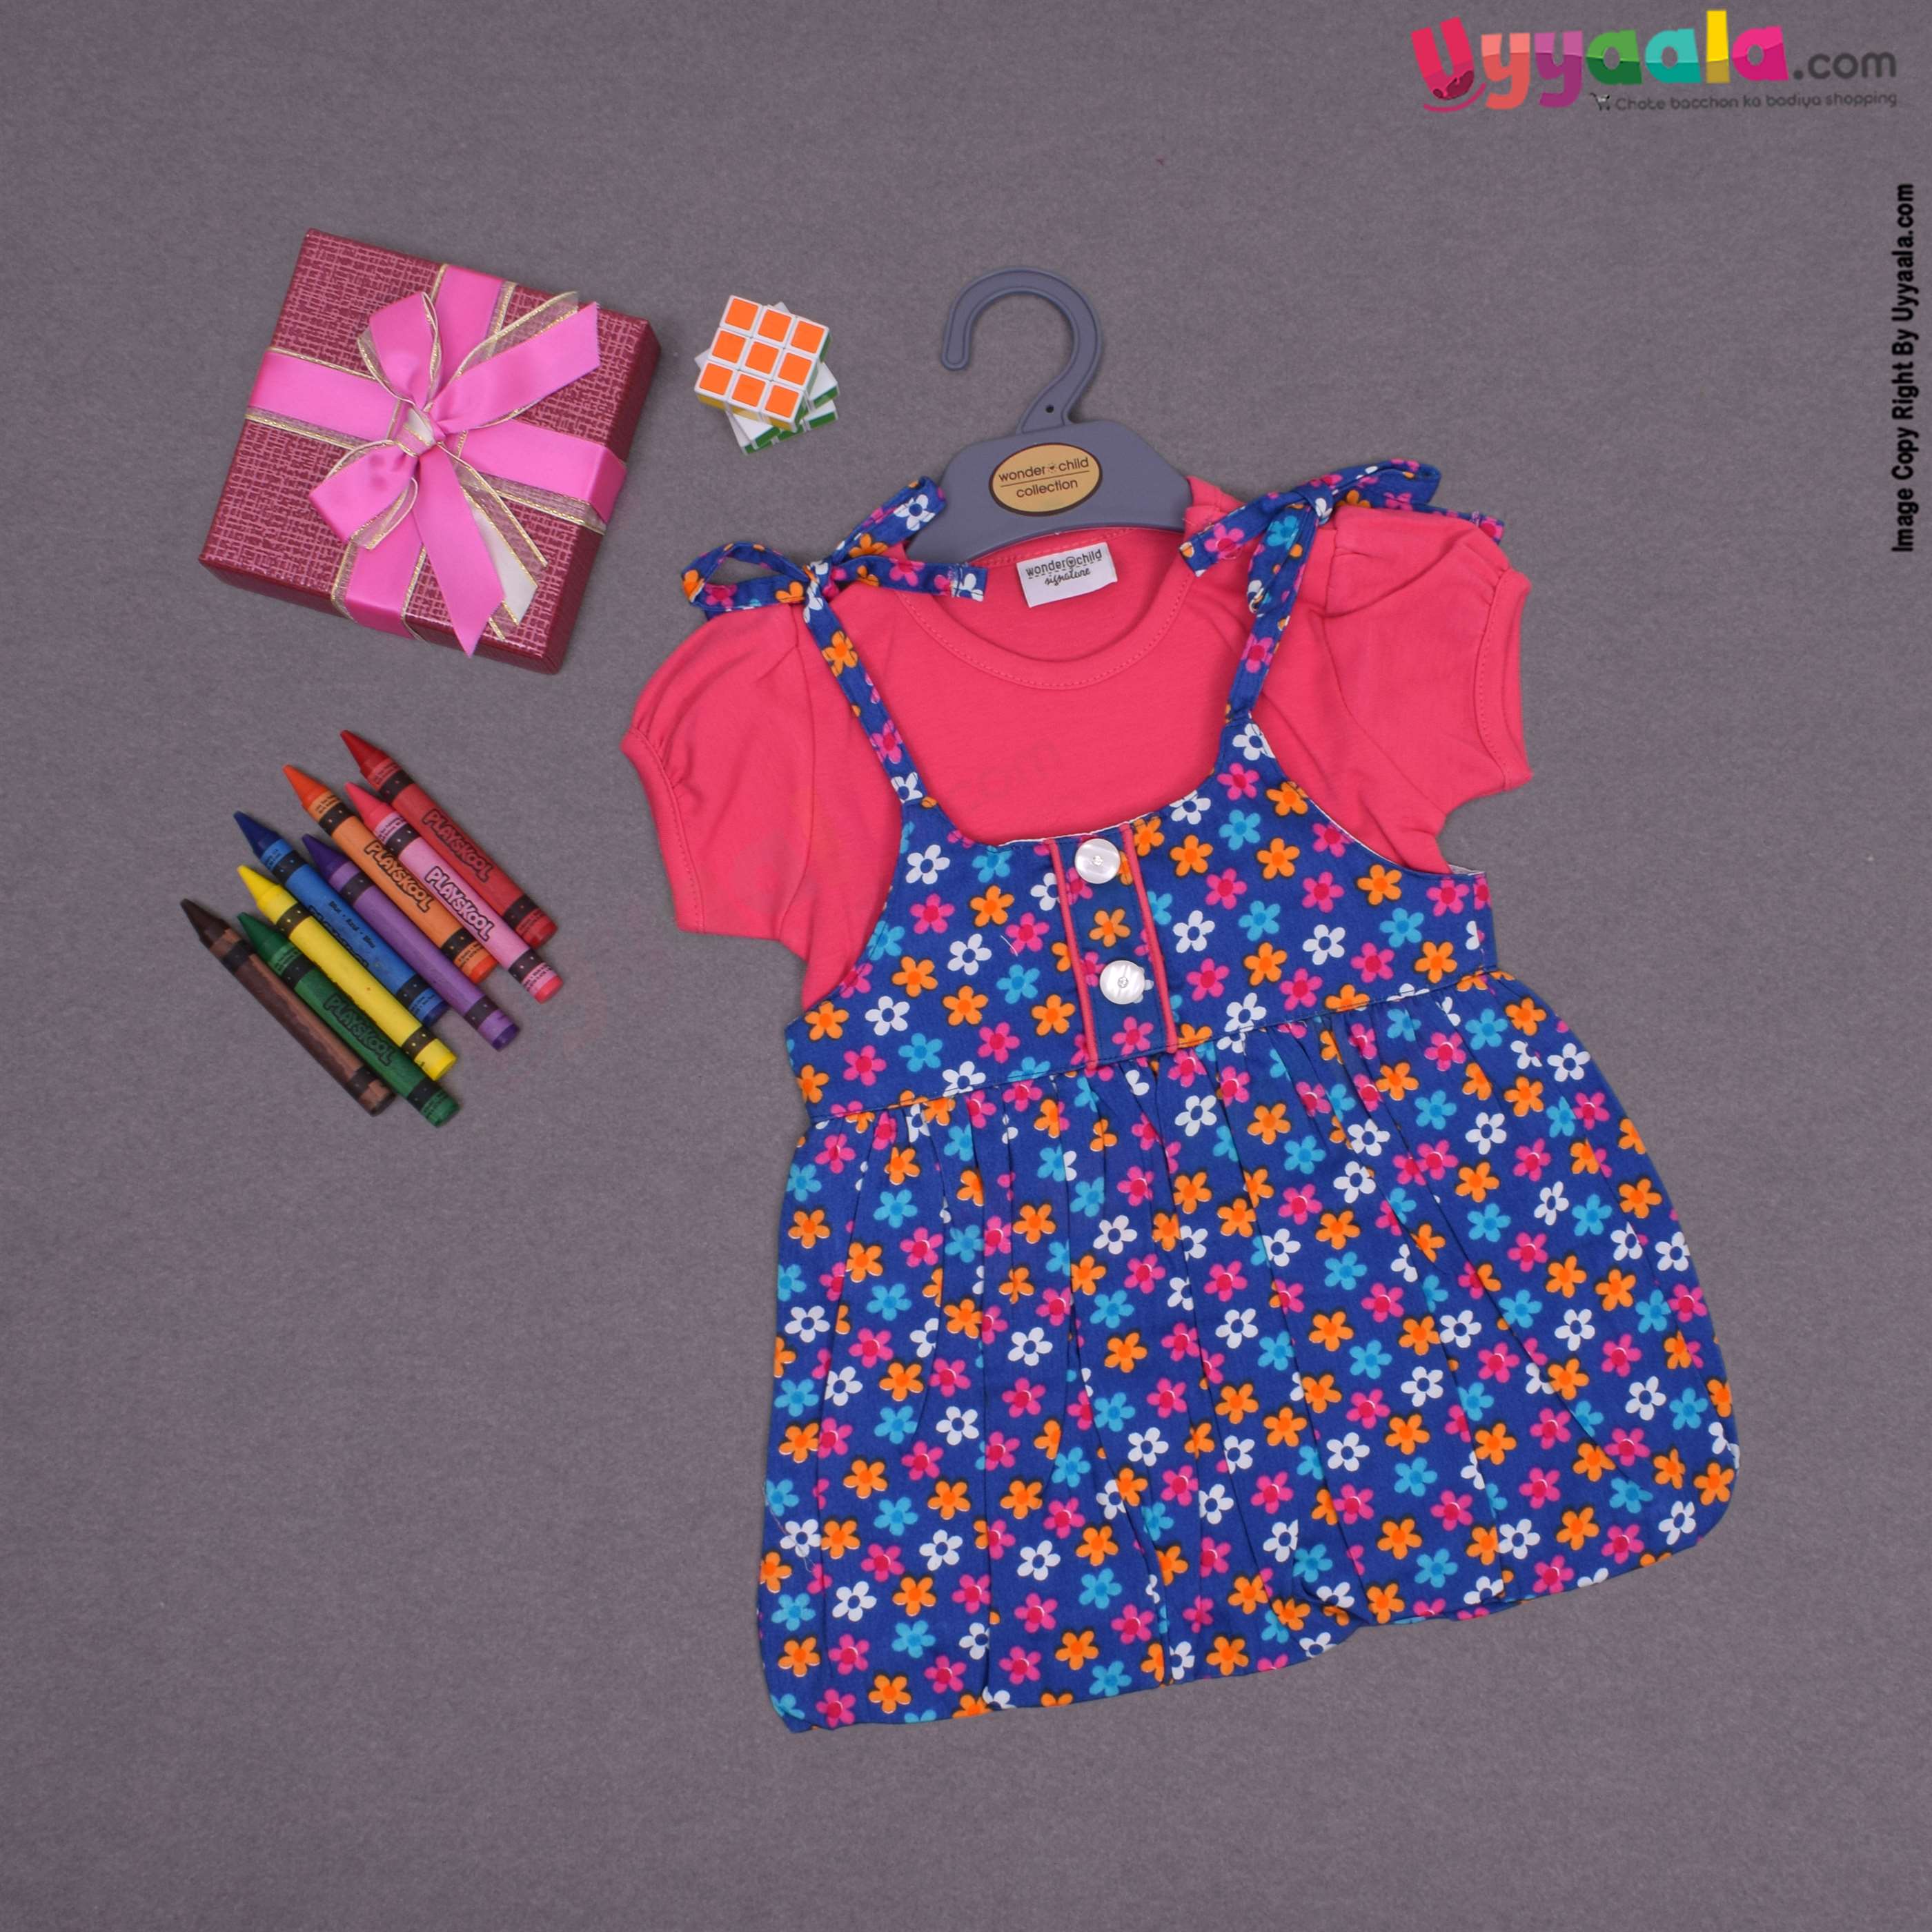 WONDER CHILD Party wear dungaree for baby girl with floral print- pink and navy blue